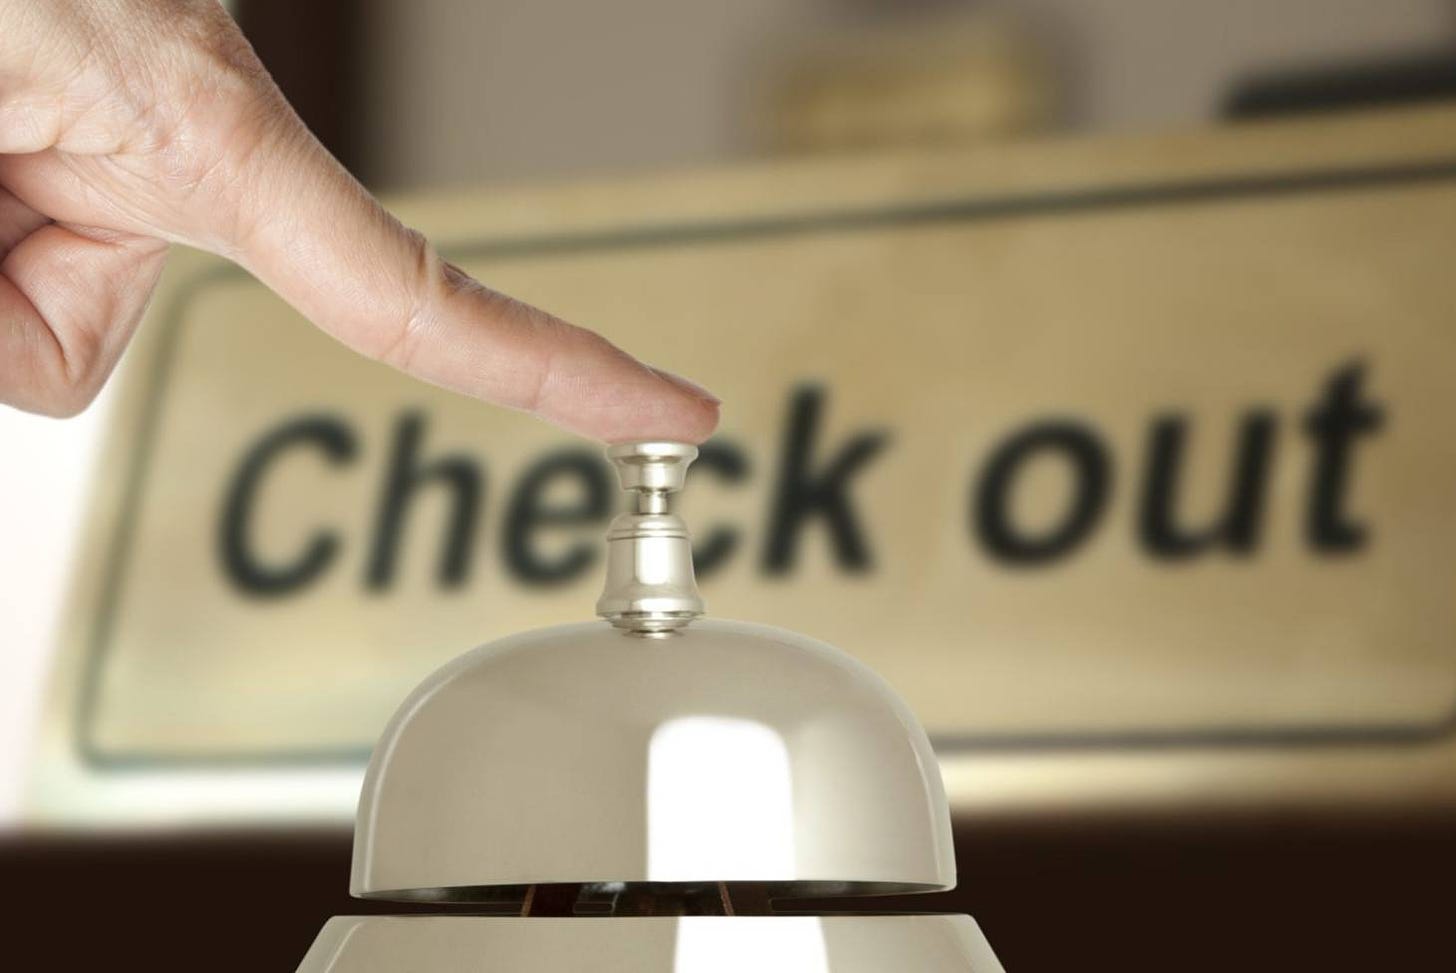 8 things you should never do at hotel checkout | Stuff.co.nz